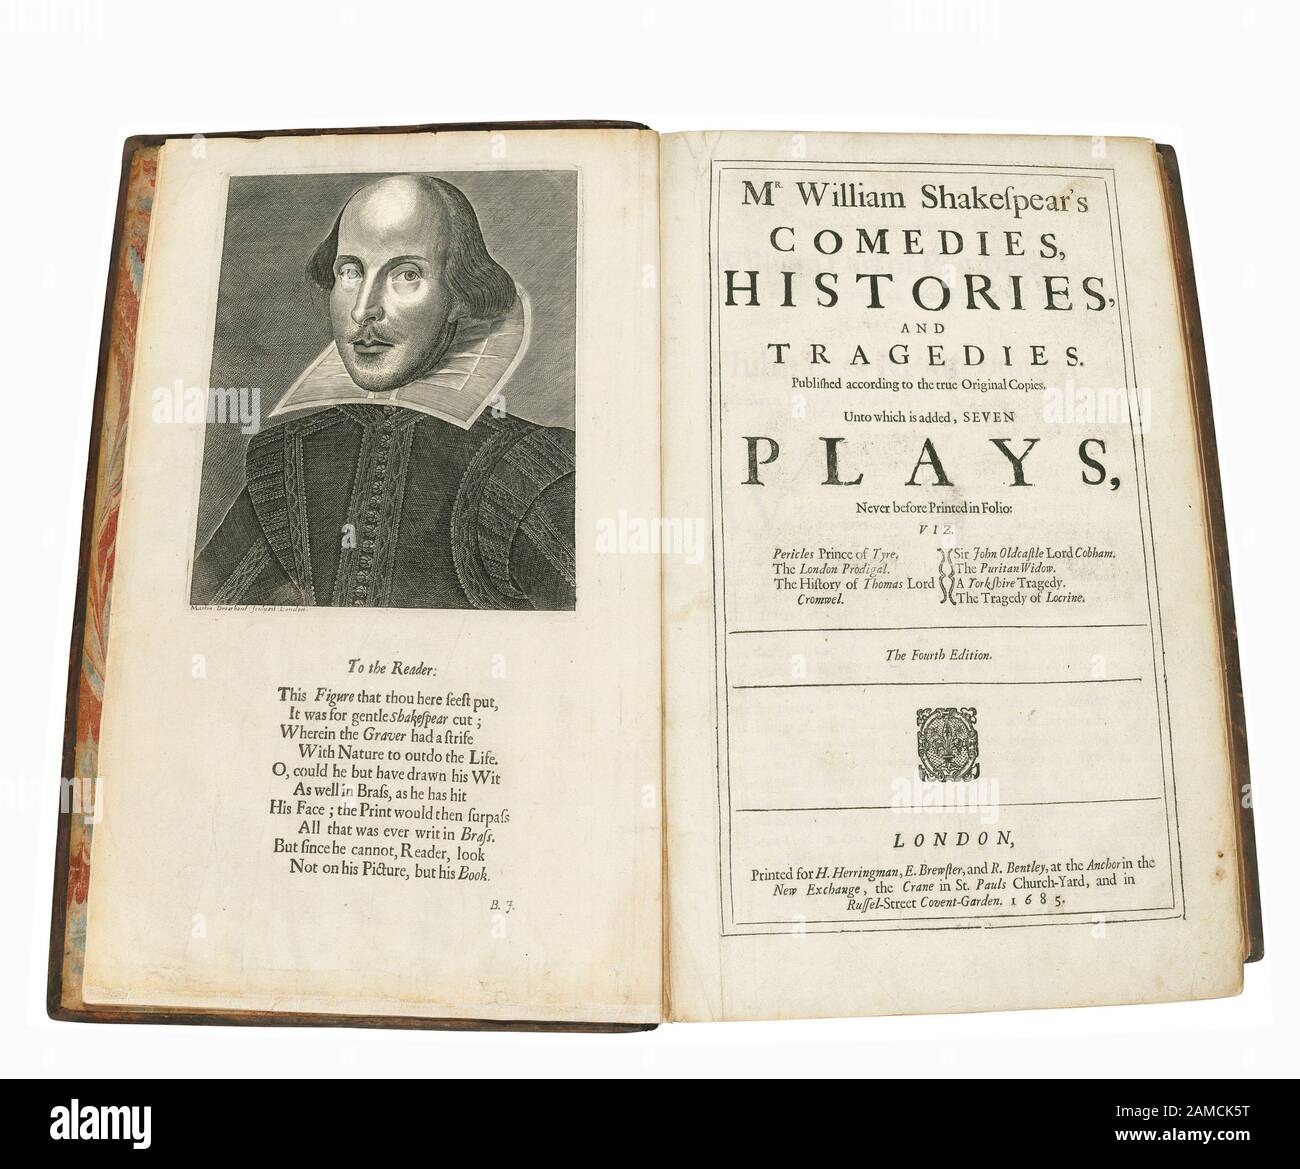 Shakespeare's First Folio 17th C Title page with Portrait of William Shakespeare. Shakespeares Comedies, Histories, & Tragedies. Published according to the true original copies. London, Printed by Isaac Iaggard, and Ed. Blount, engraving by artist Martin Droeshout, 1623 The Droeshout portrait or Droeshout engraving is a portrait of William Shakespeare engraved by Martin Droeshout as the frontispiece for the title page of the First Folio collection of Shakespeare's plays, published in 1623. It is one of only two works of art definitively identifiable as a depiction of the poet. Stock Photo